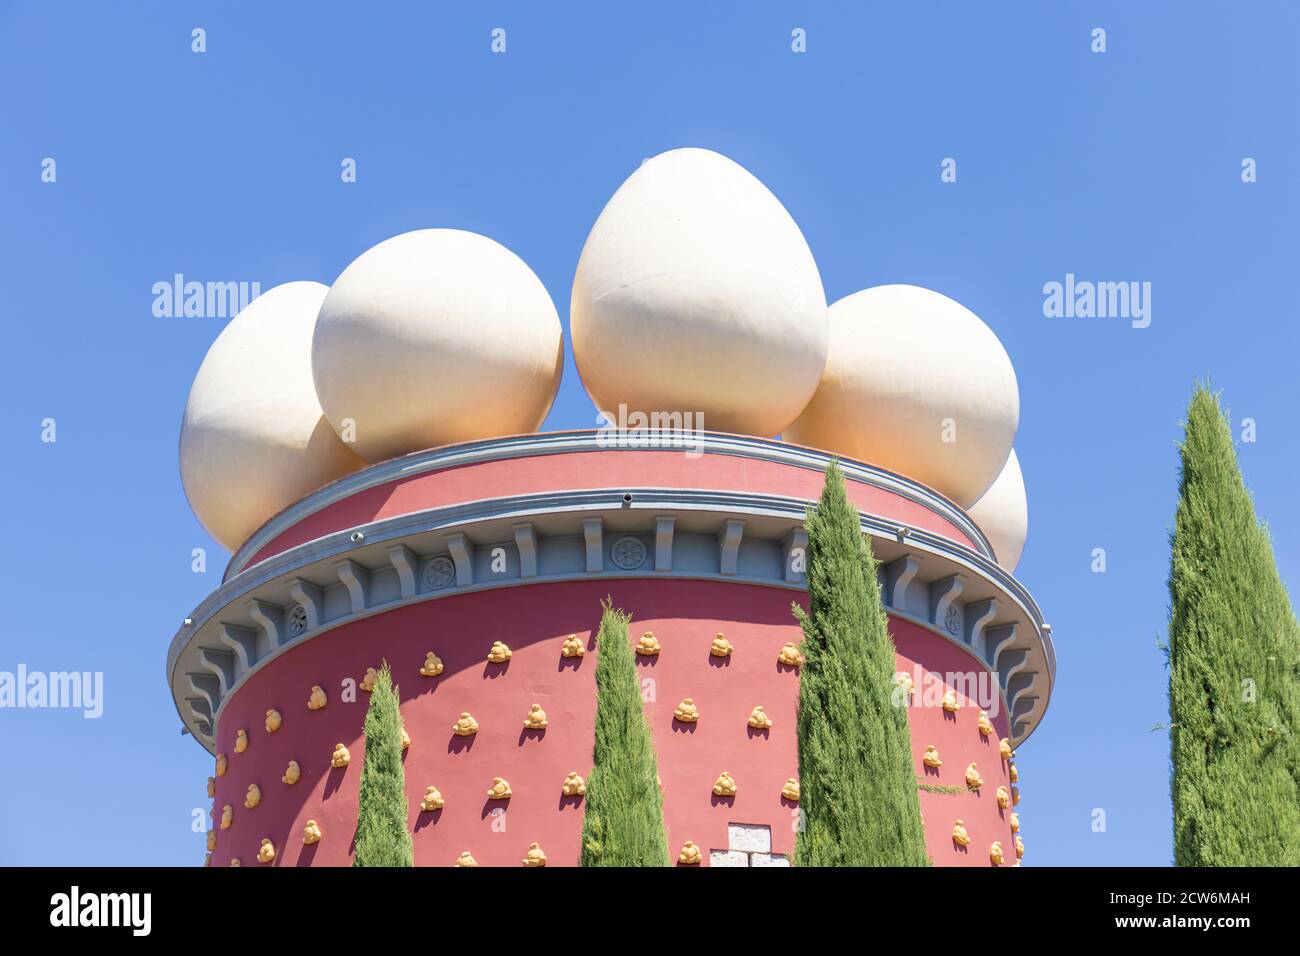 Surrealist Ball High Resolution Stock Photography and Images - Alamy